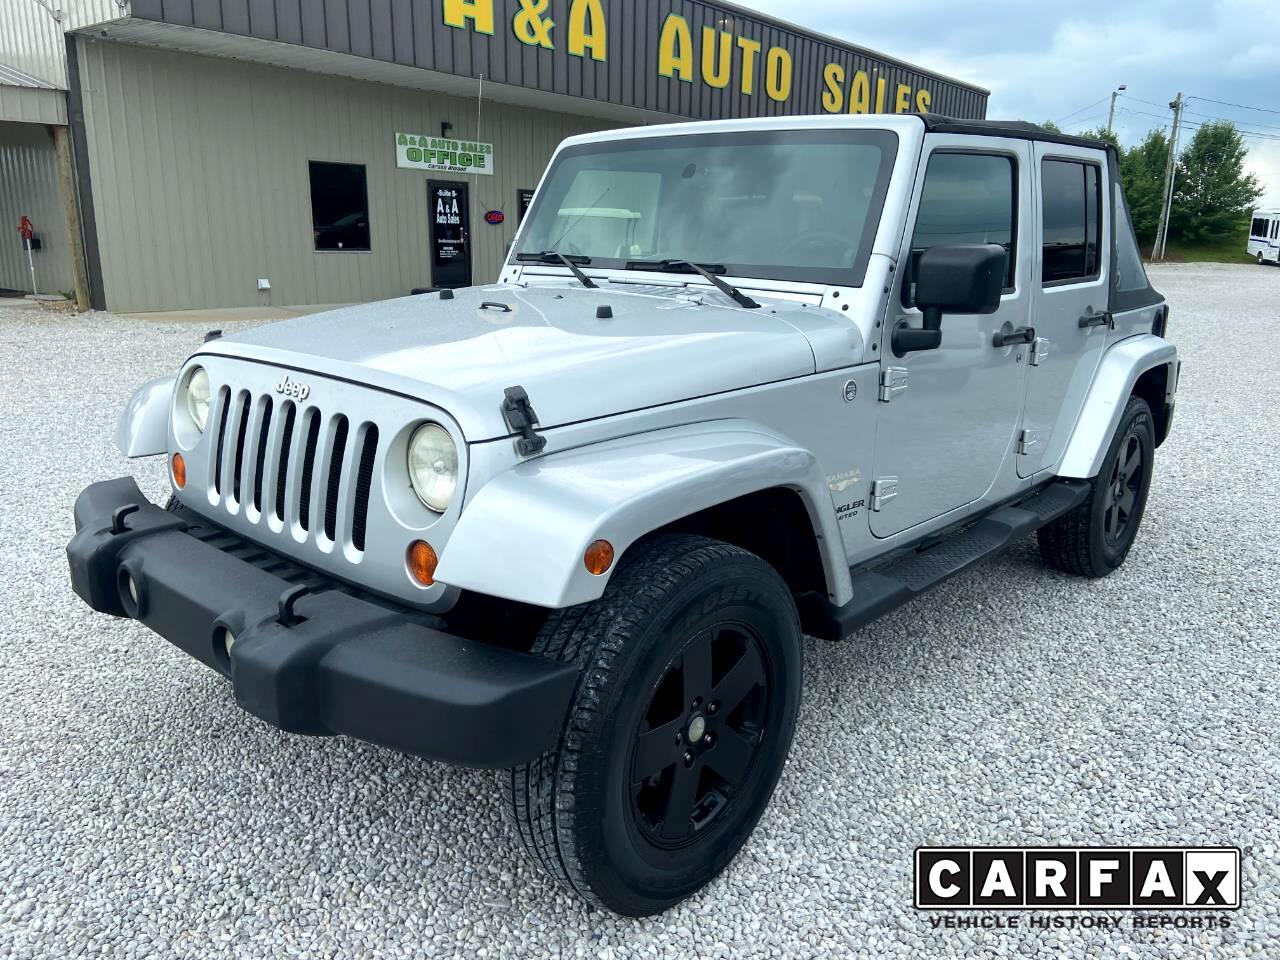 Used 2007 Jeep Wrangler Unlimited Sahara 4WD for Sale in Somerset KY 42503  A & A Auto Sales